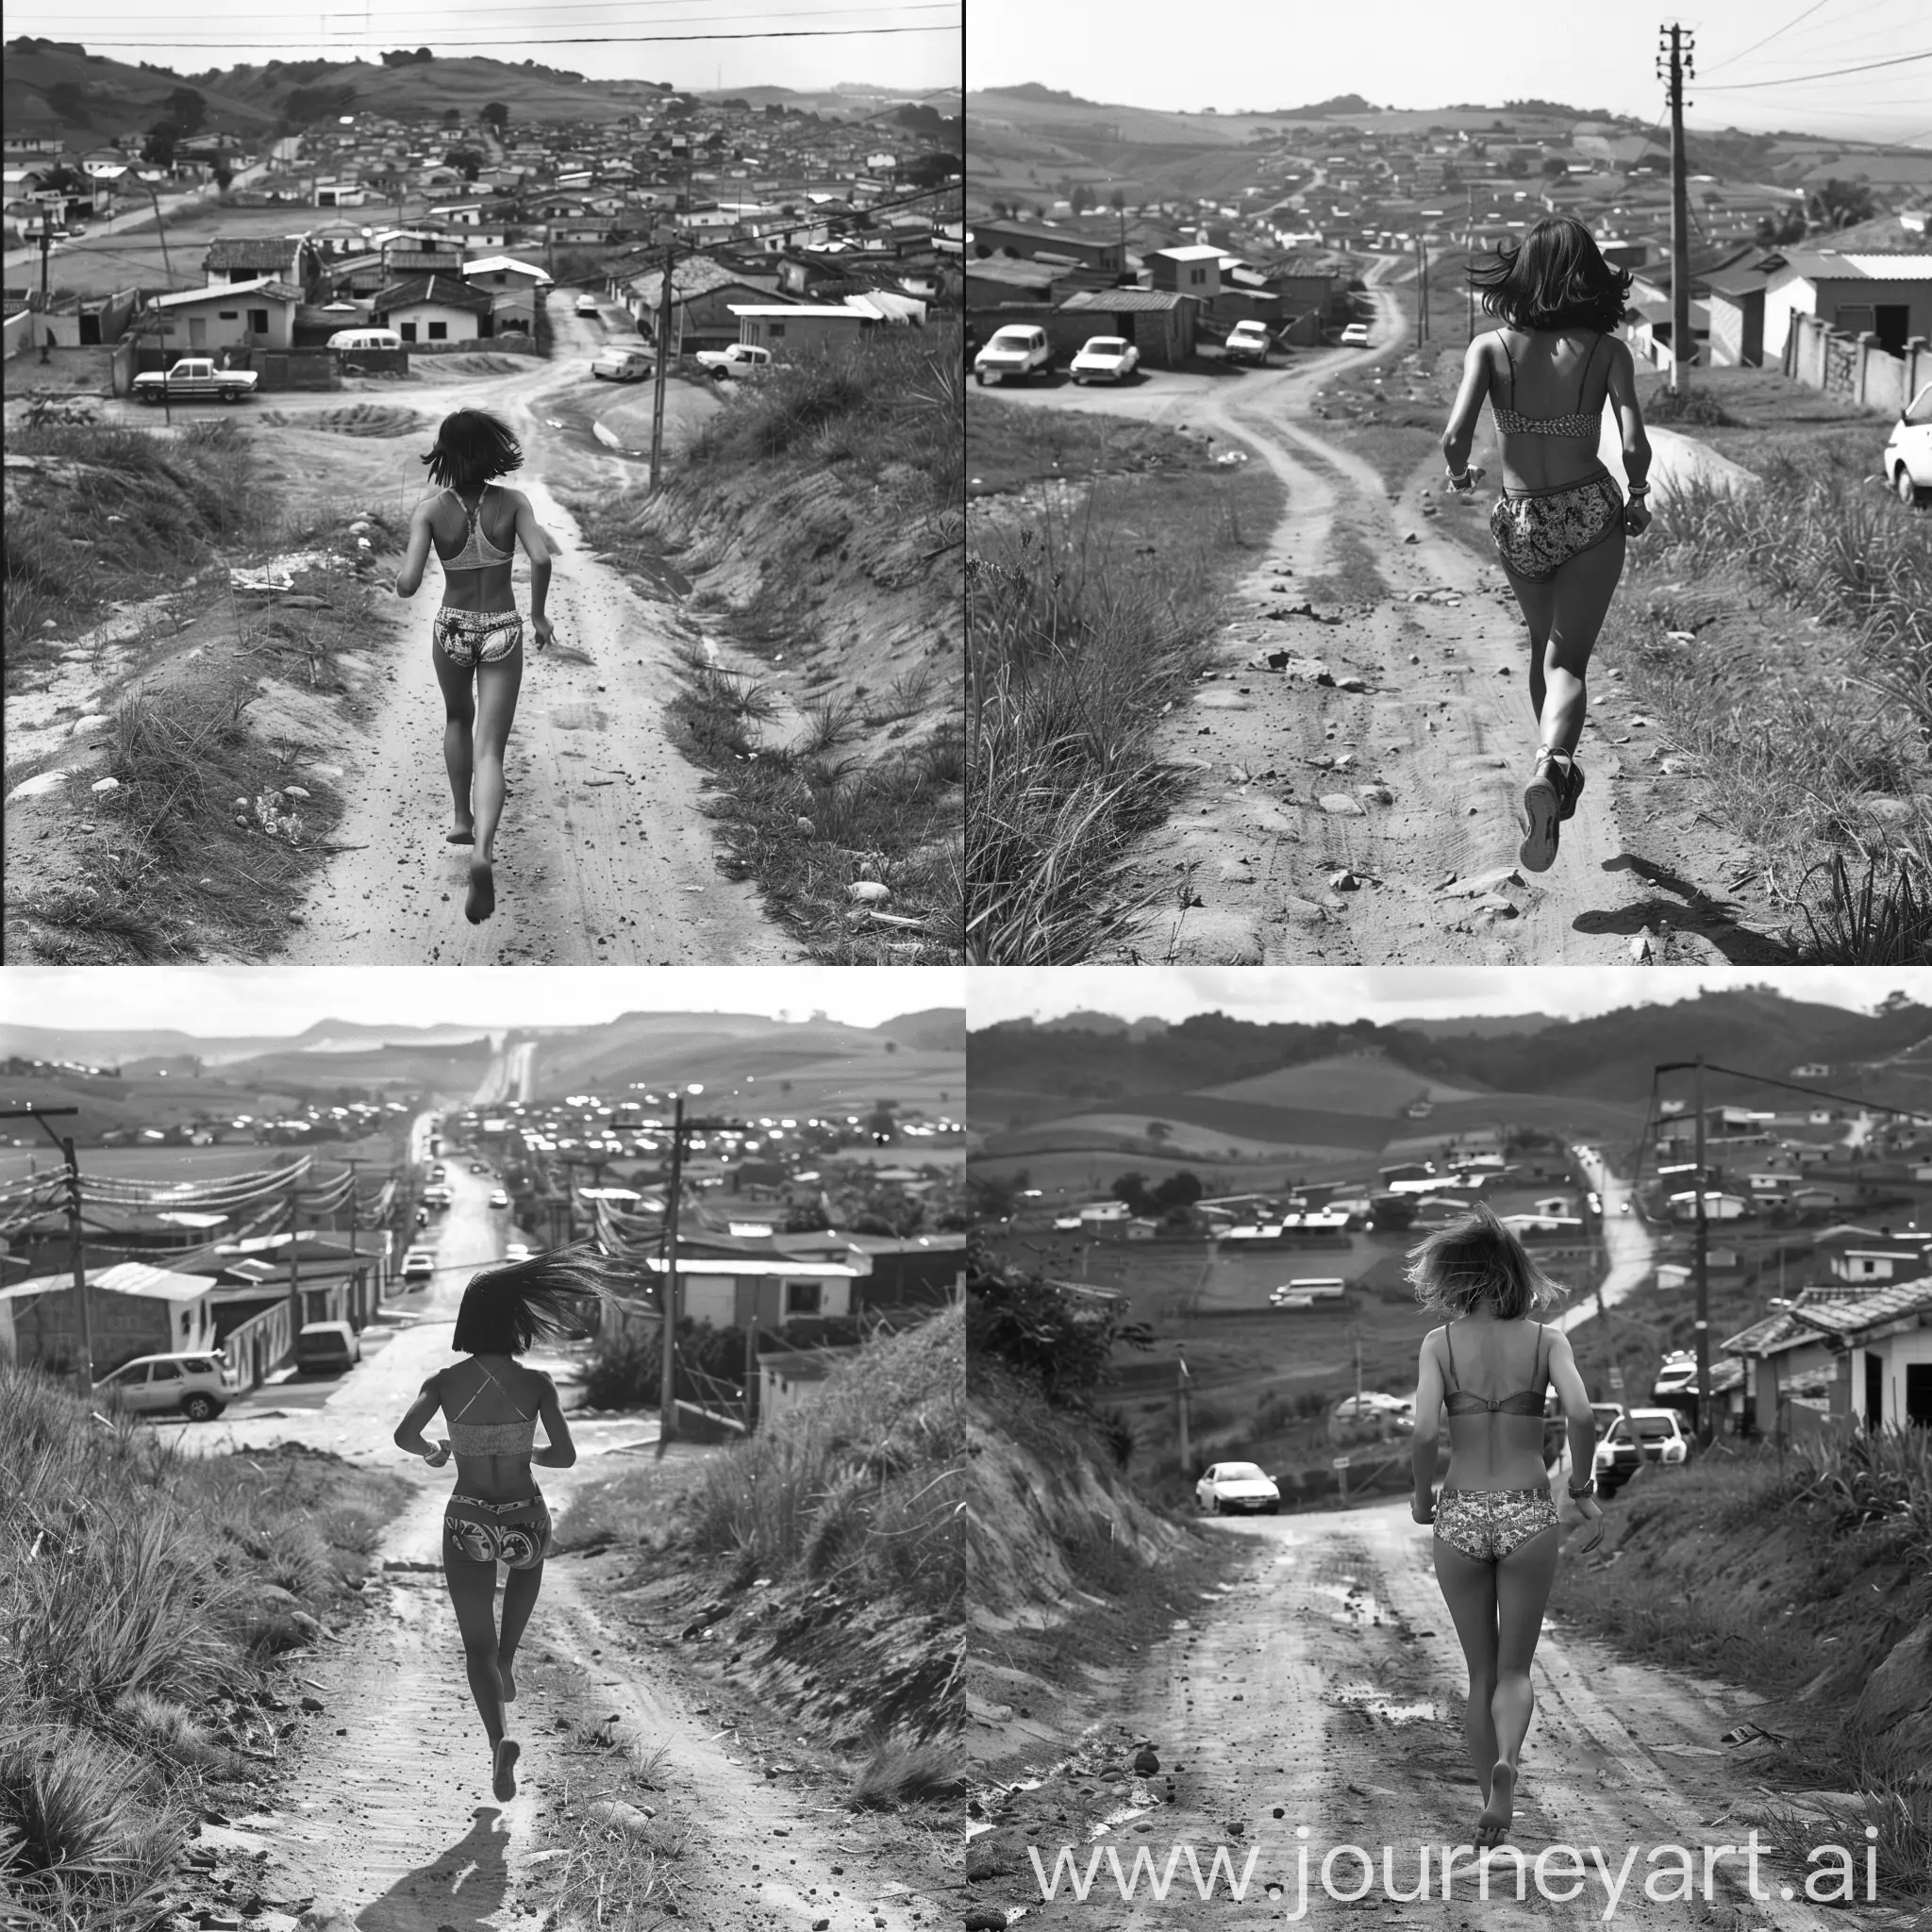 A Brazilian girl, 16 years old, with short hair, is depicted running down a dirt road in a rural area. She wears a short shorts and a crop top, her long hair flowing behind her as she moves. The dirt road is lined with small houses, cars parked along the sides, and in the background, a sprawling community with hills can be seen.